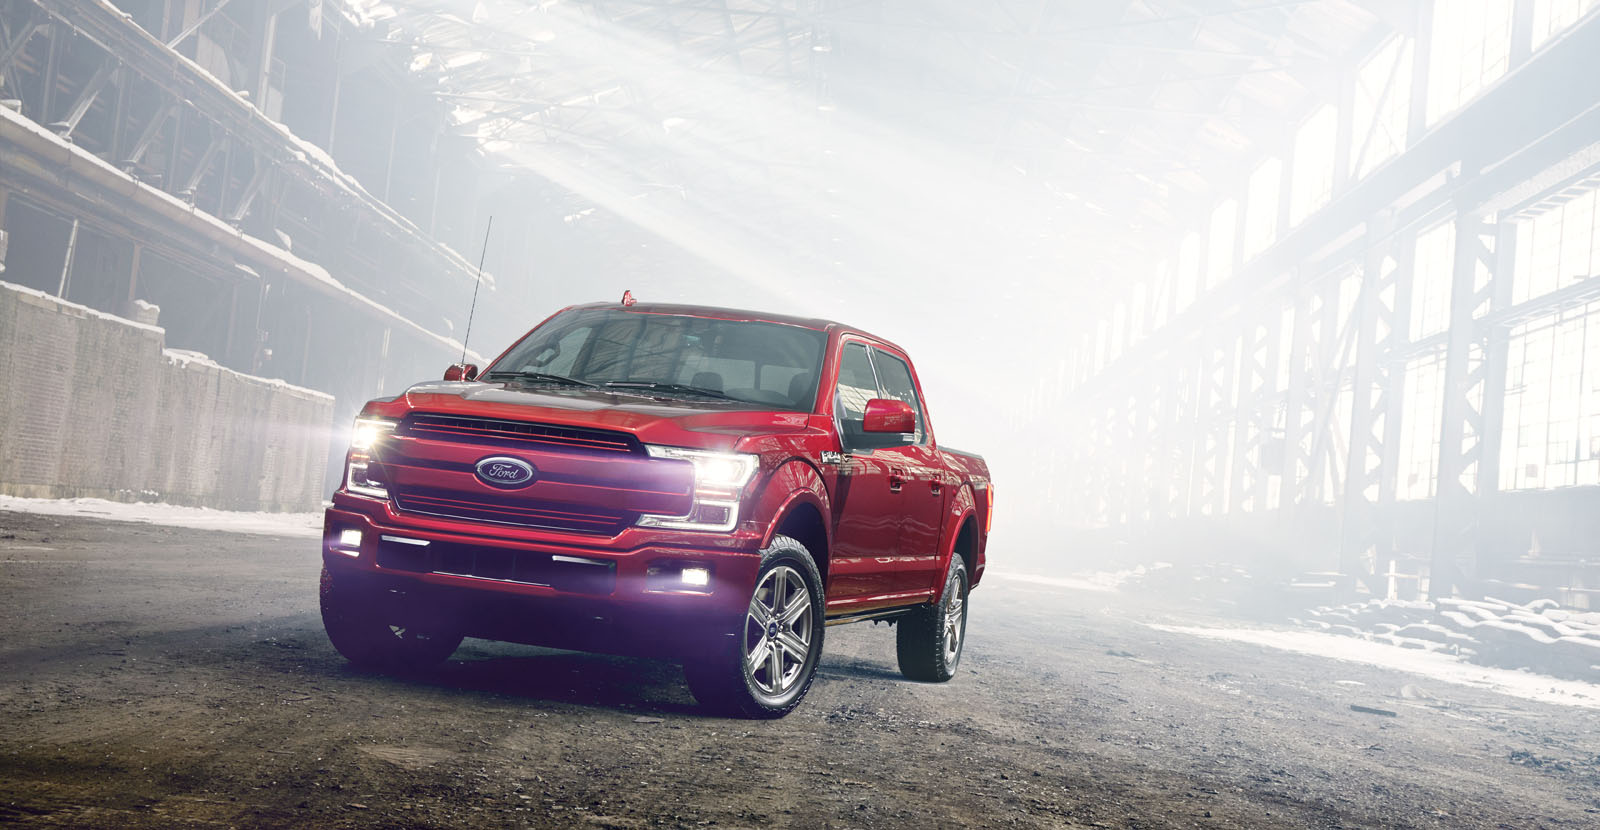 Ford, America’s truck leader, introduces the new 2018 Ford F-150 – now even tougher, even smarter and even more capable than ever.